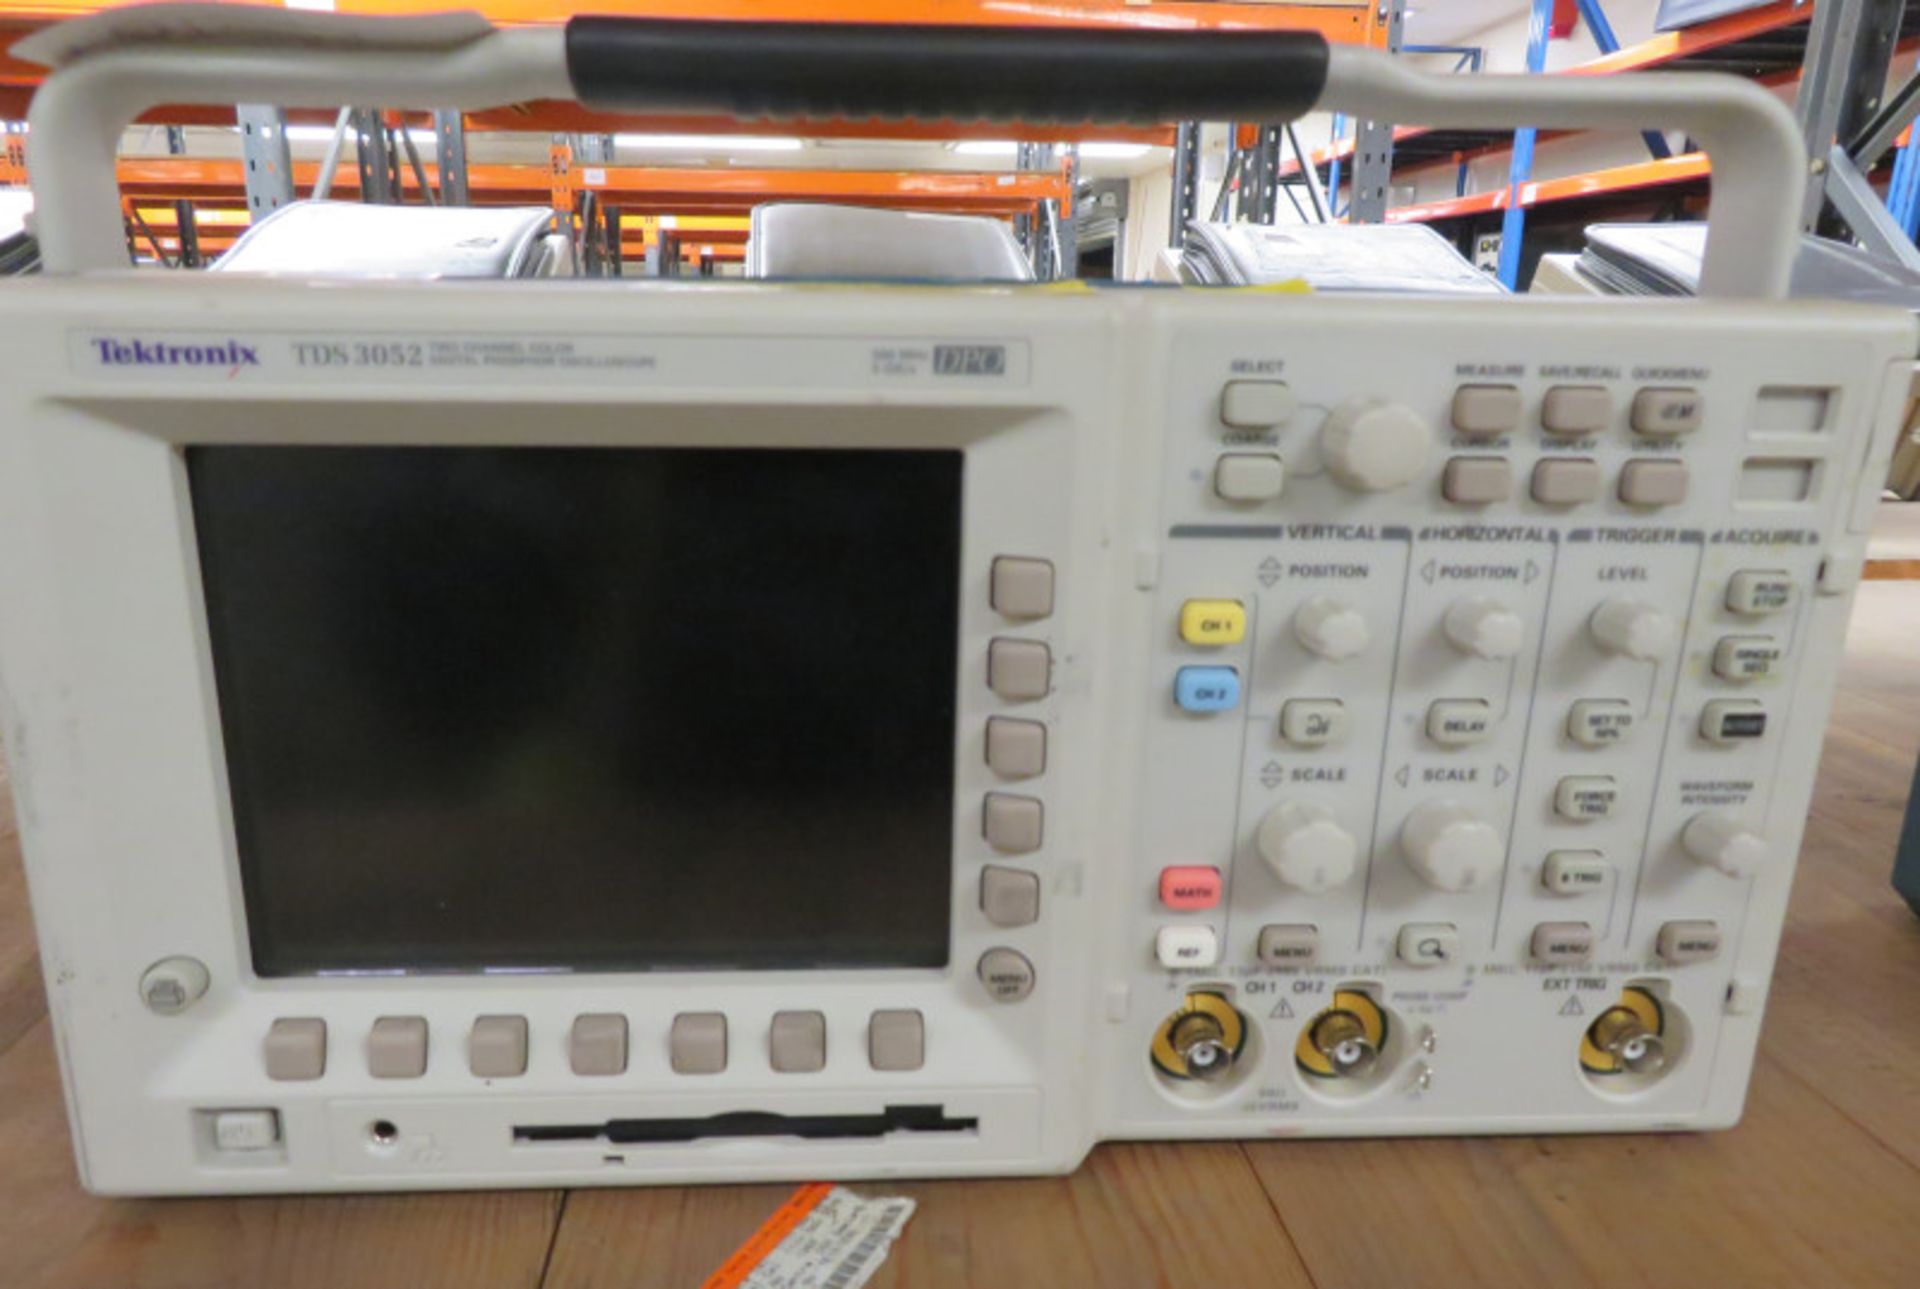 Tektronix TDS 3052 Two Channel Color Digital Phosphor Oscilloscope- 500MHz - 5GS/s - Image 2 of 3